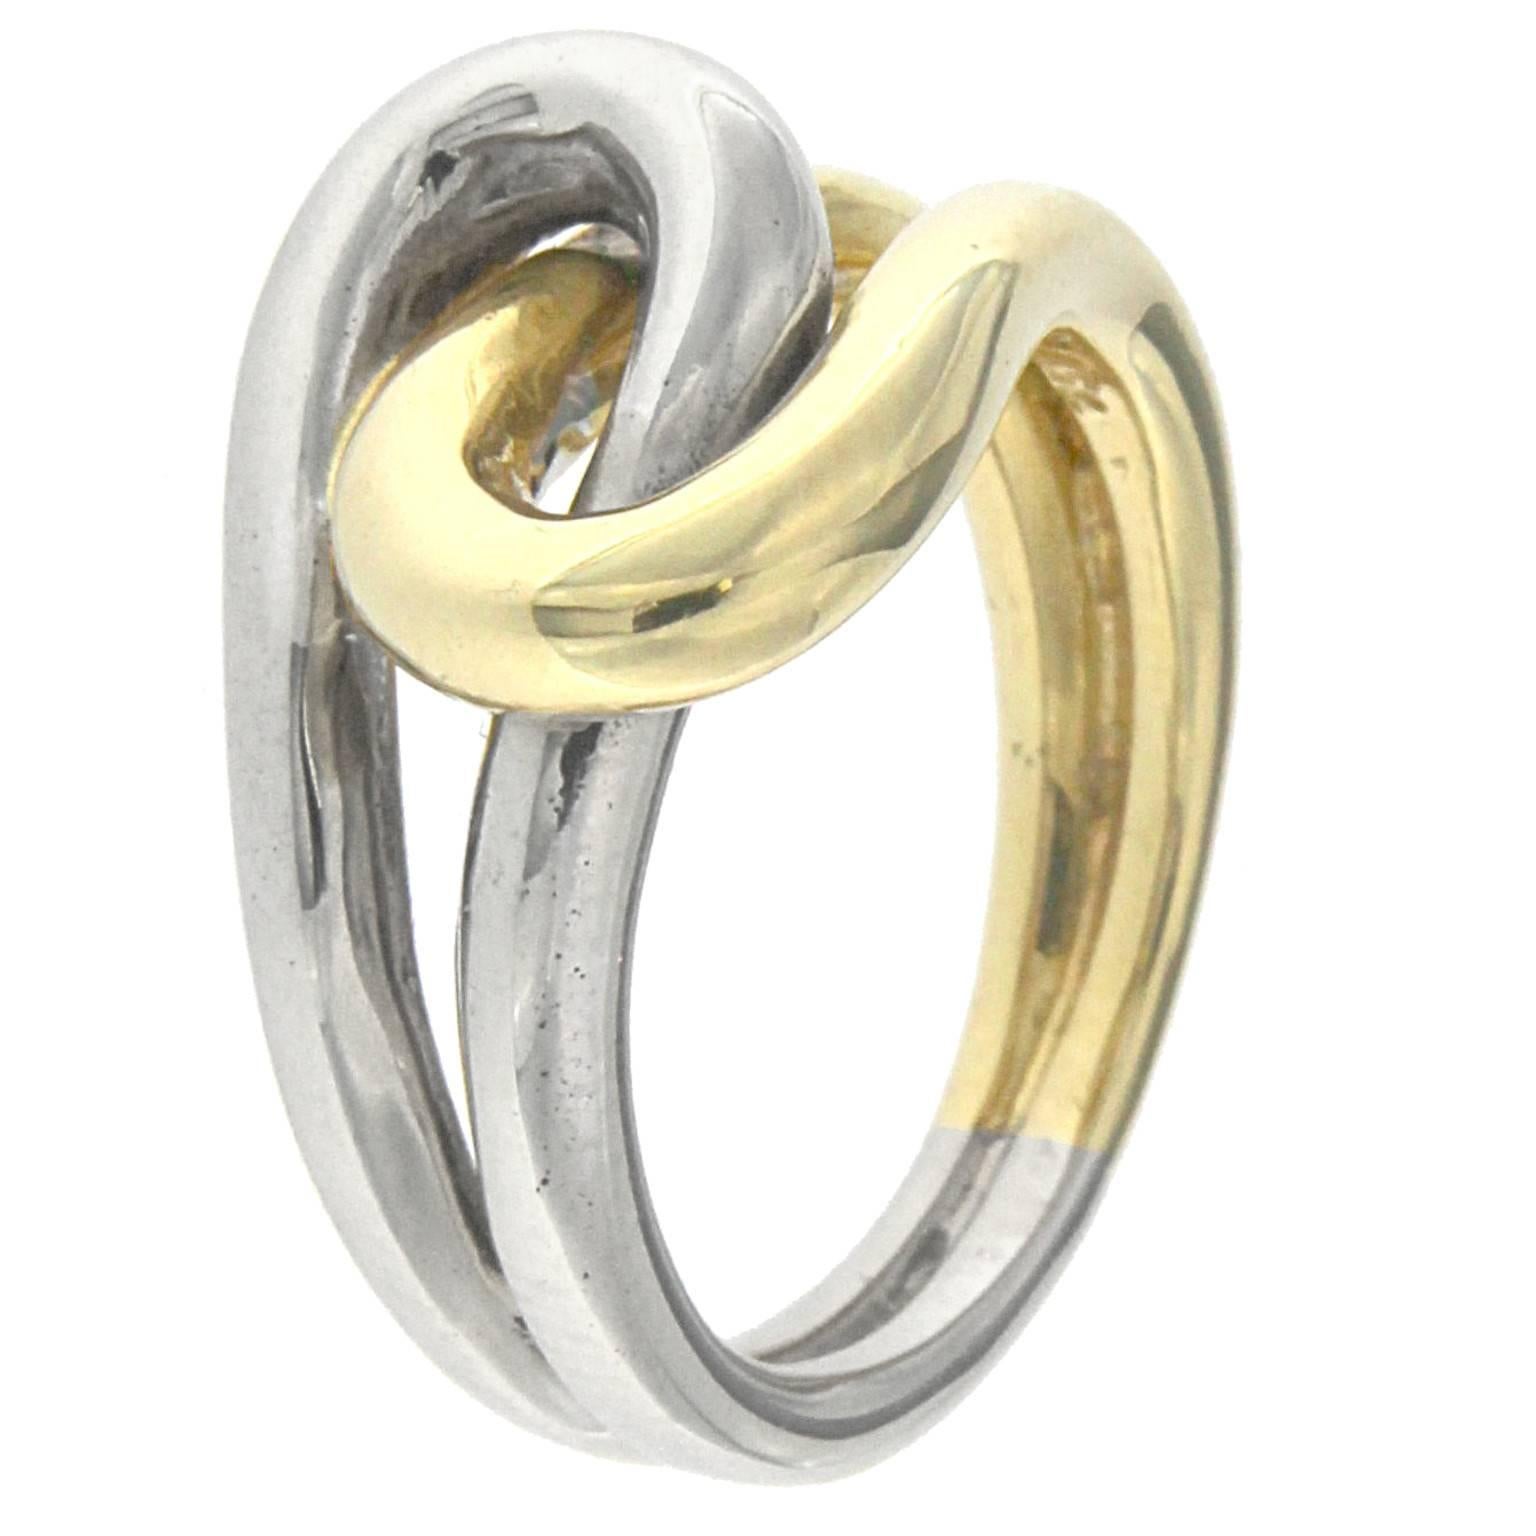 Knot Ring in 18 kt  yellow  and white gold

the total weight of the gold is  gr 10.30


STAMP:  750
US SIZE 5
